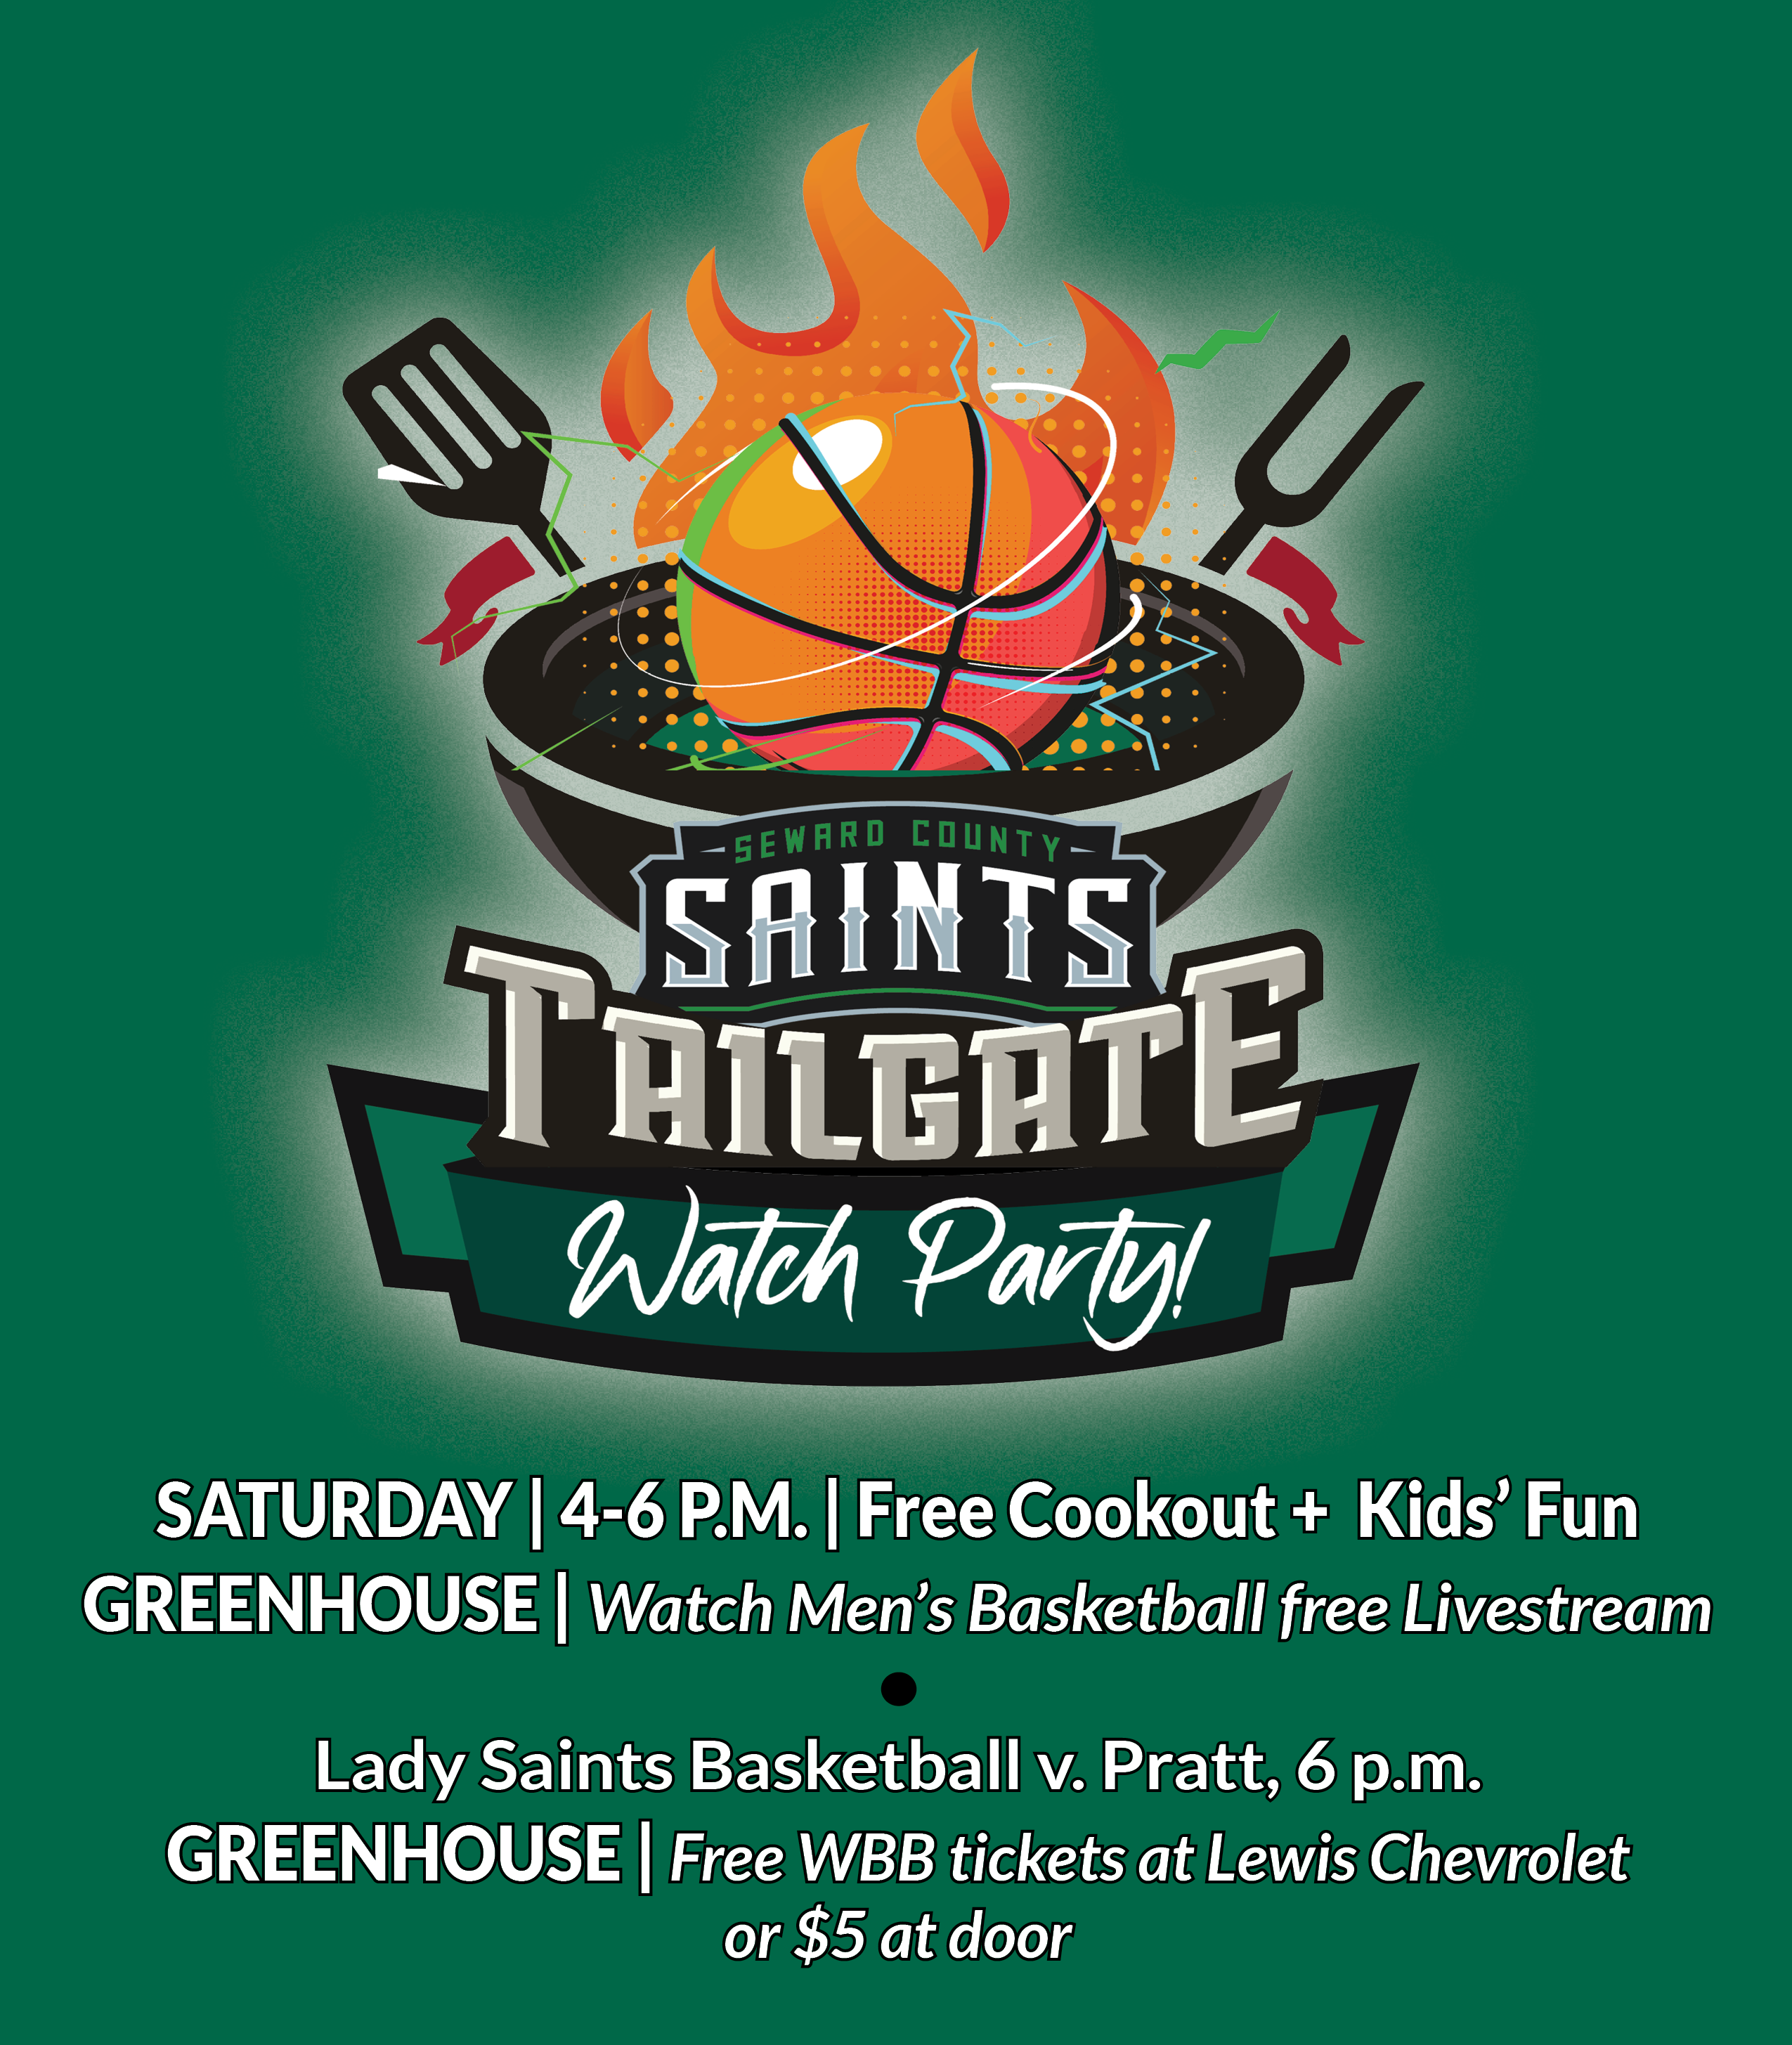 SCCC Hosts Community Tailgate and Watch Party Saturday